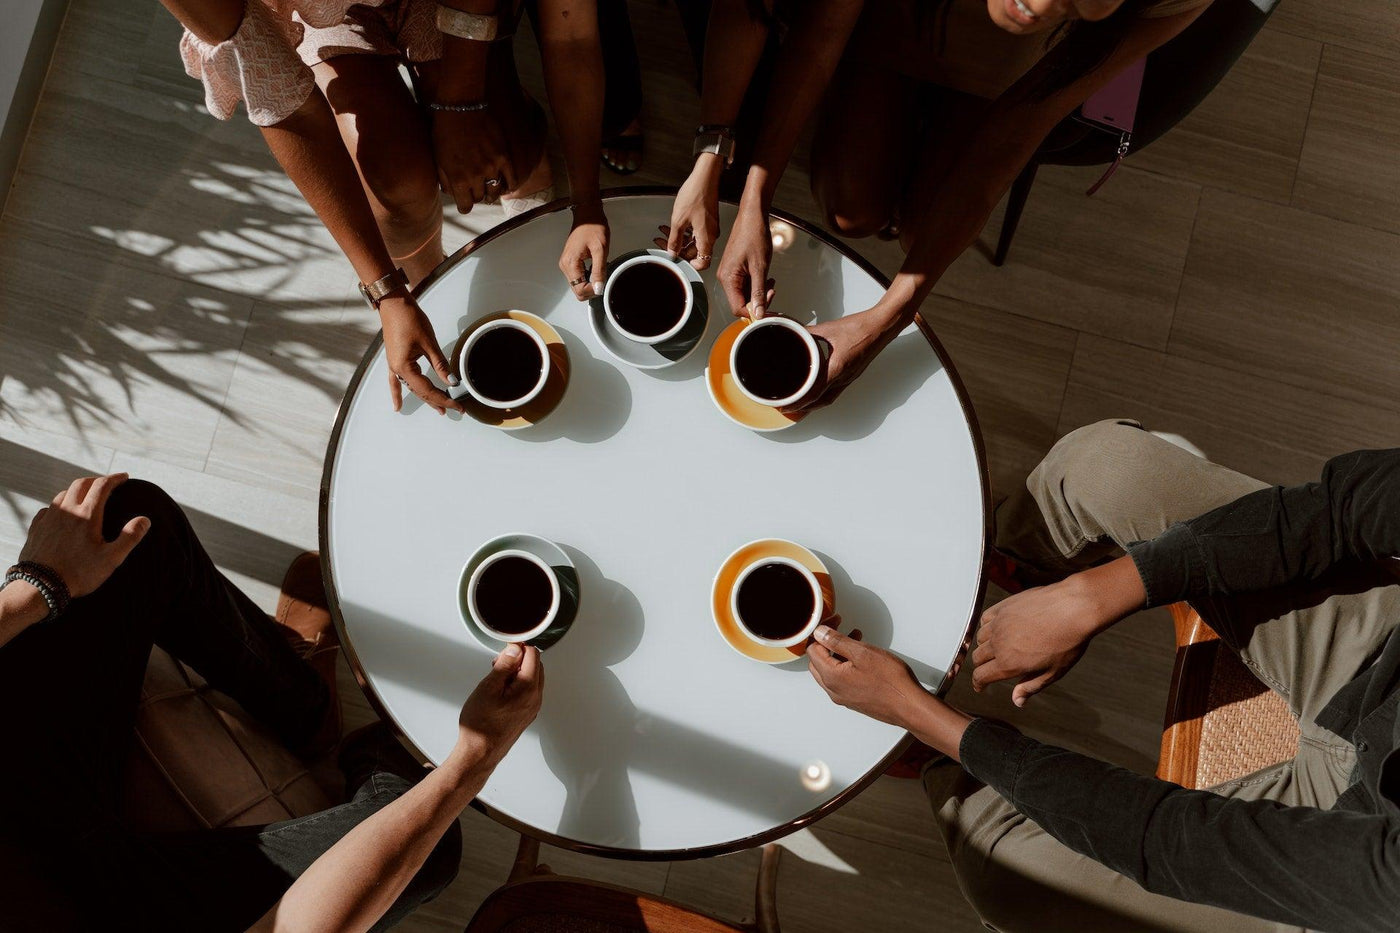 The Perks of a Caffeinated Office: Should Employers Provide Coffee for the Team?